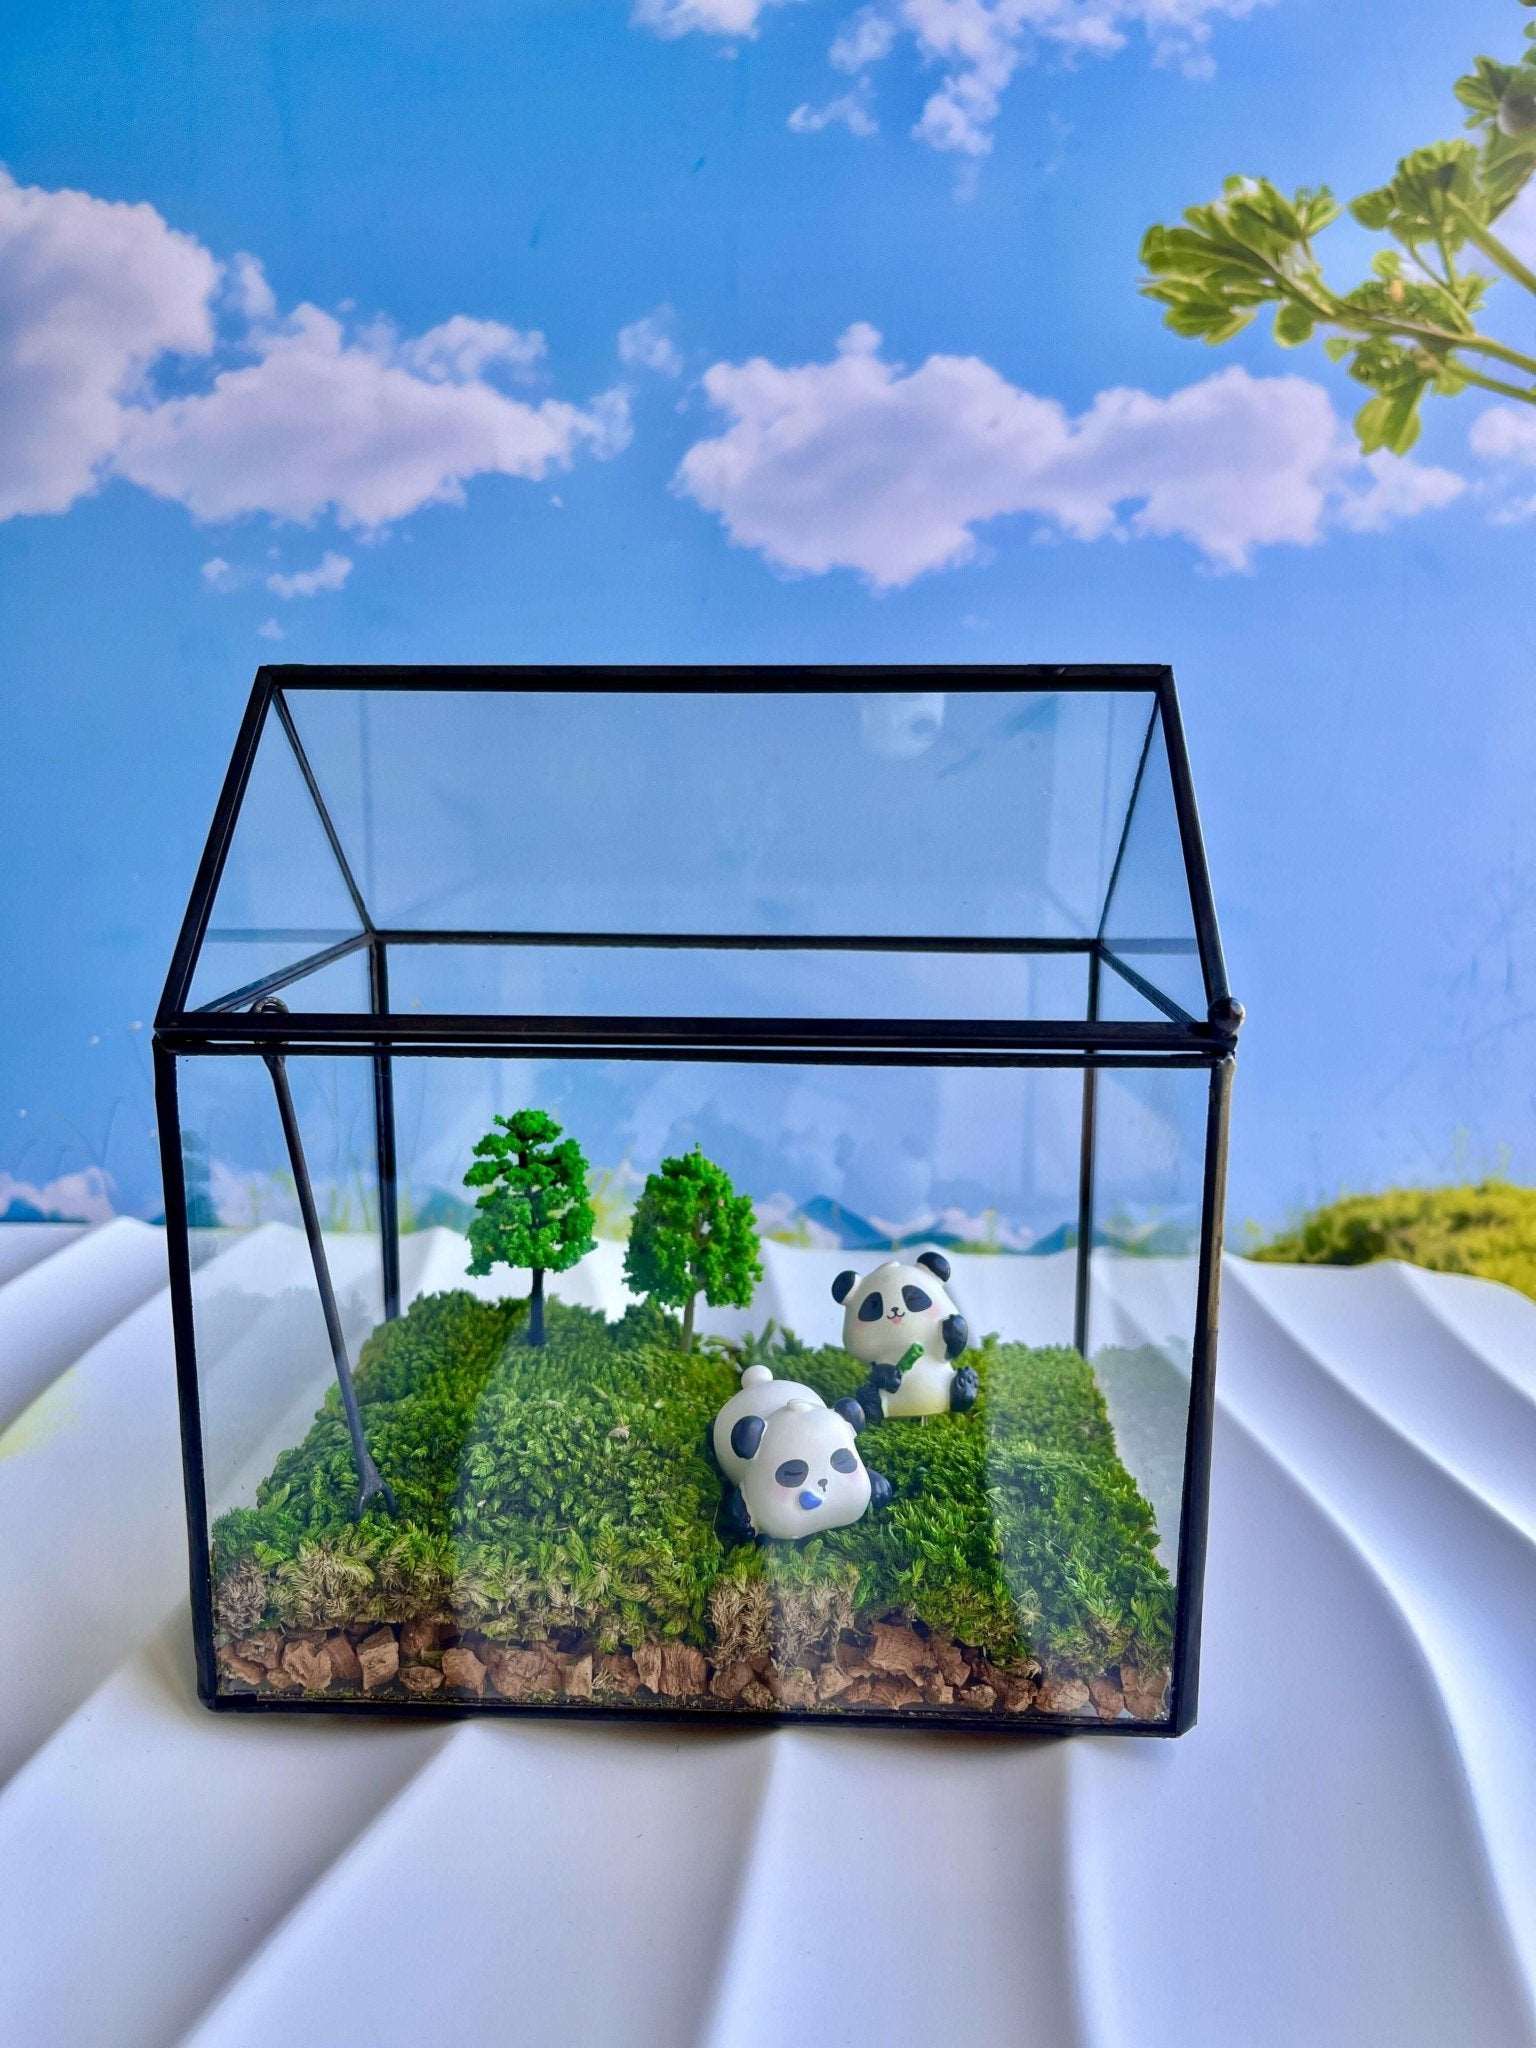 Handmade Panda Pals Glass Terrarium - Miniature Wildlife Scene and TraBrighten up your desk with the "Panda Pals" Mini Micro Landscape Lawn, where the serene charm of nature meets the playful spirit of wildlife. This captivating Handma